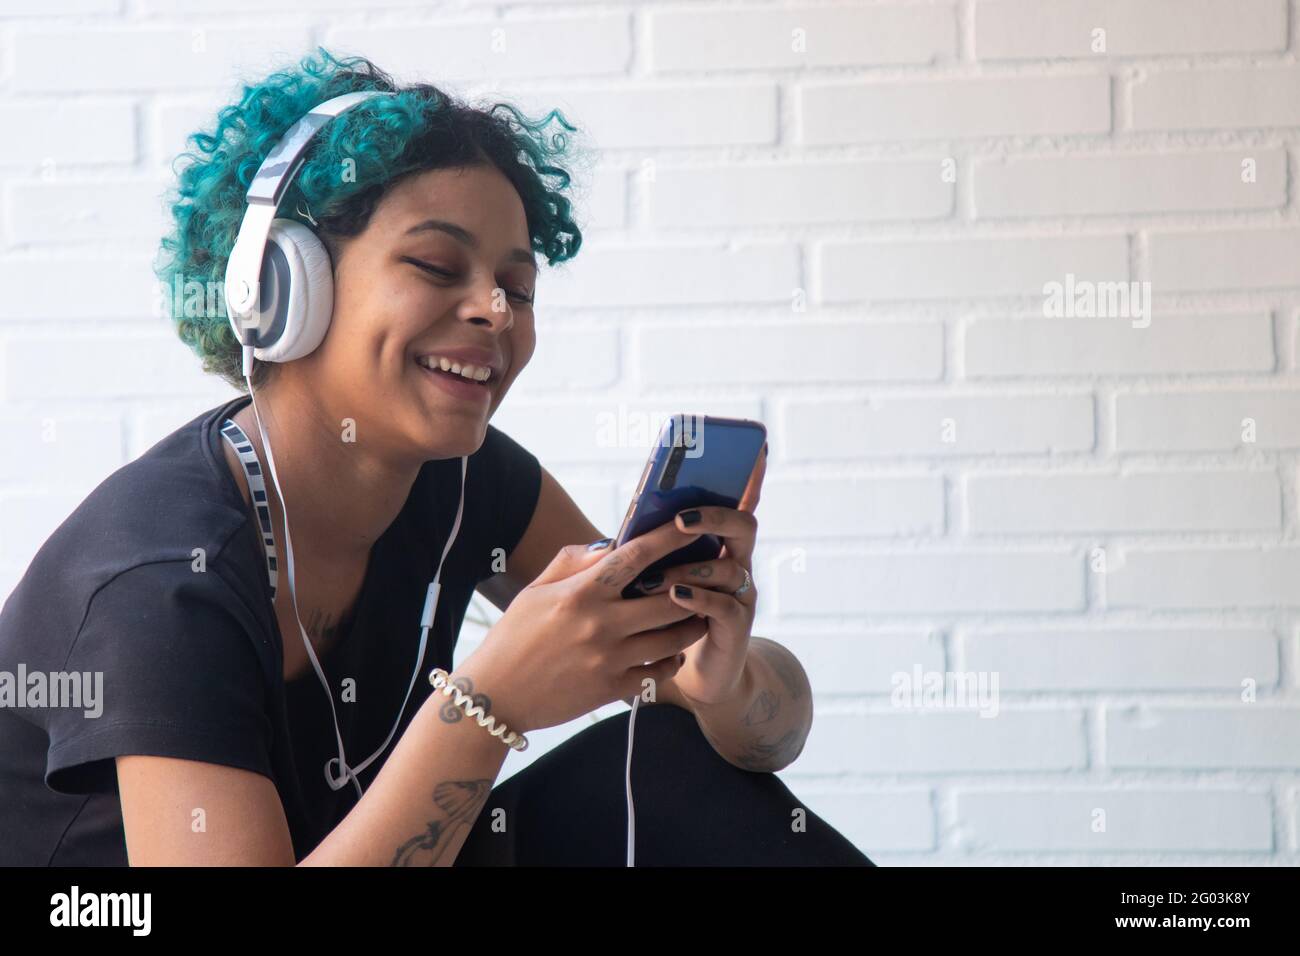 portrait of young woman with mobile phone and headphones listening to music Stock Photo